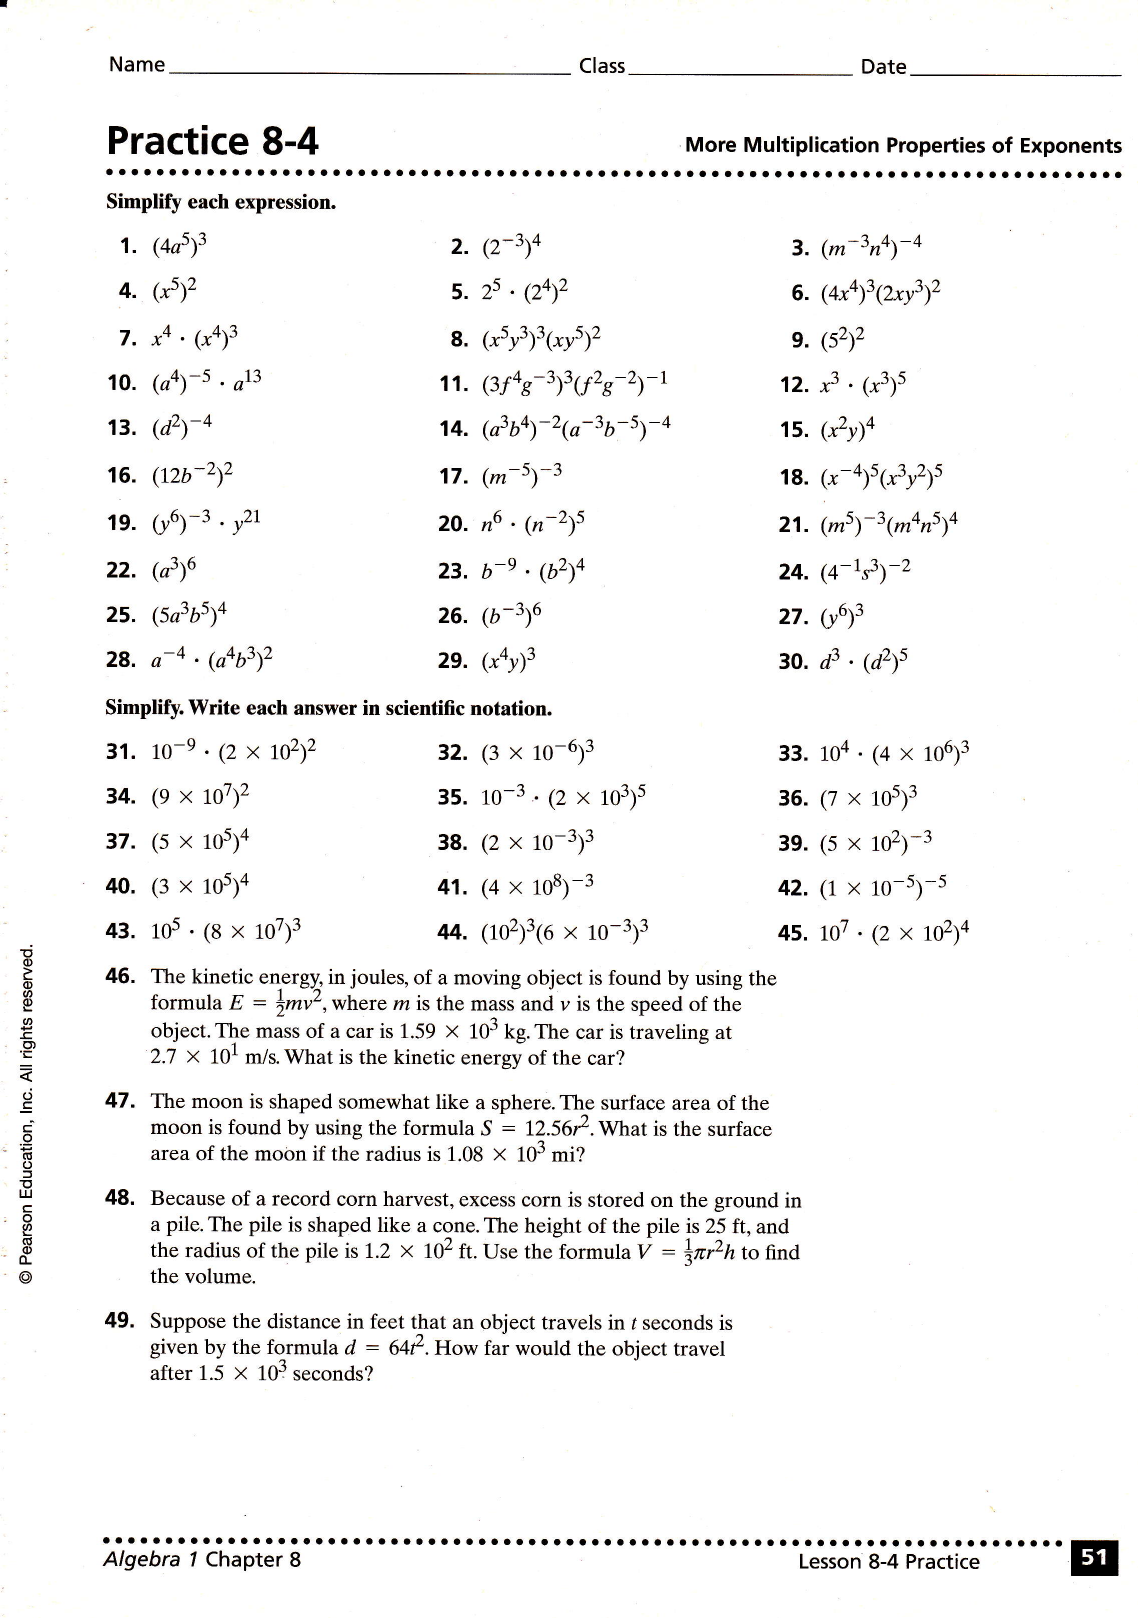 practice 10-10 Intended For Multiplication Properties Of Exponents Worksheet